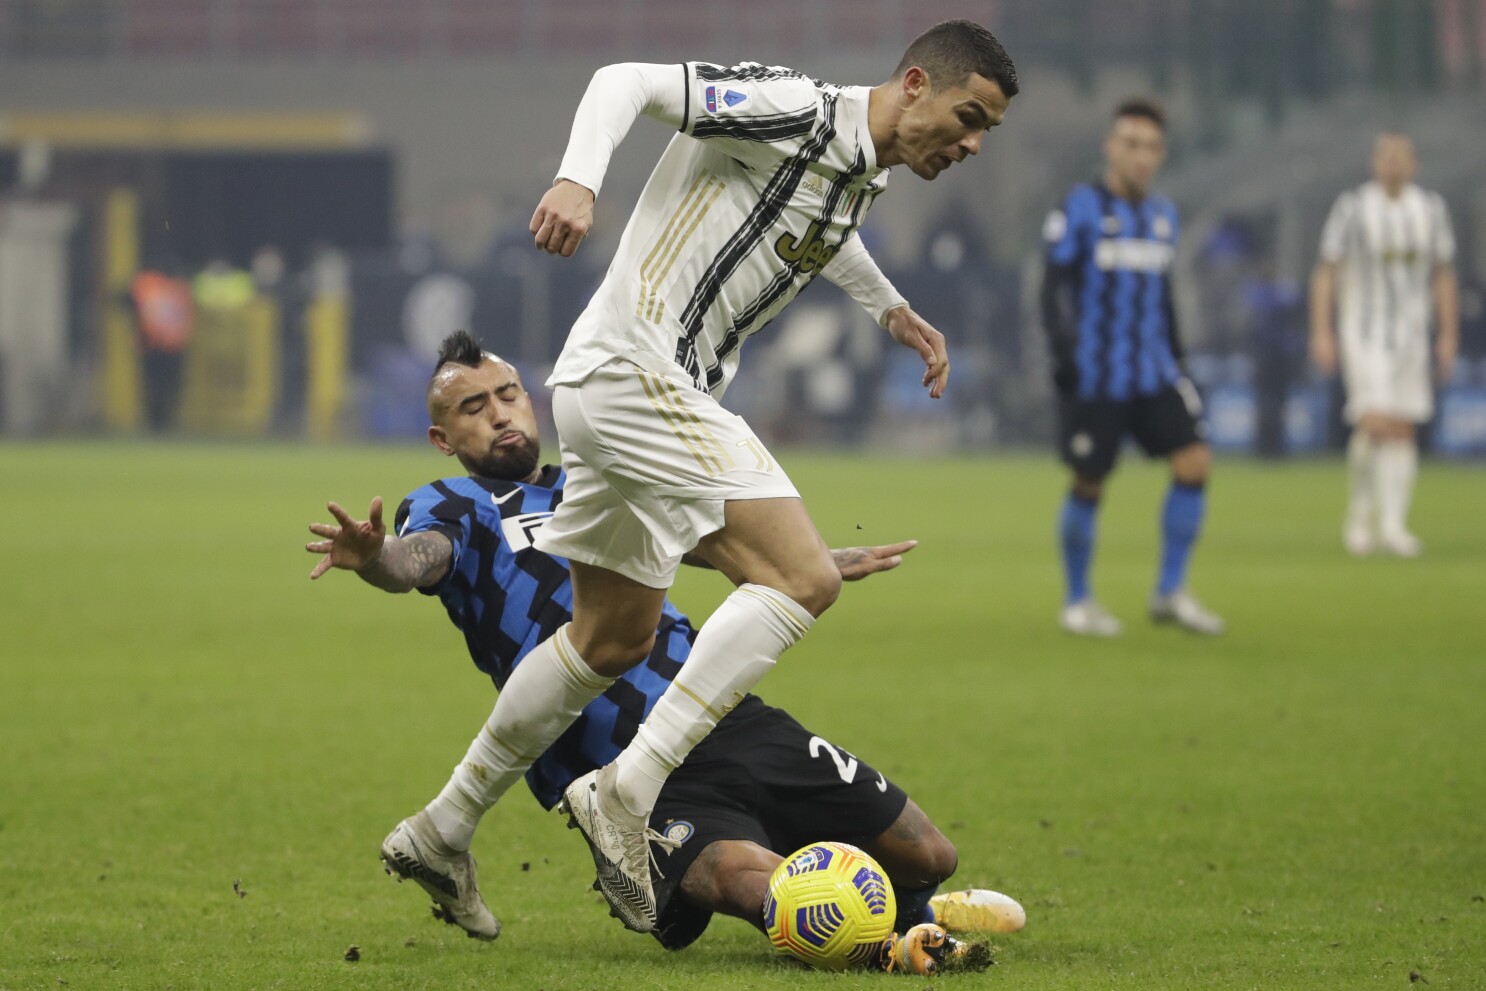 Juve S Title Run At Risk Following 2 0 Loss At Inter Milan The San Diego Union Tribune